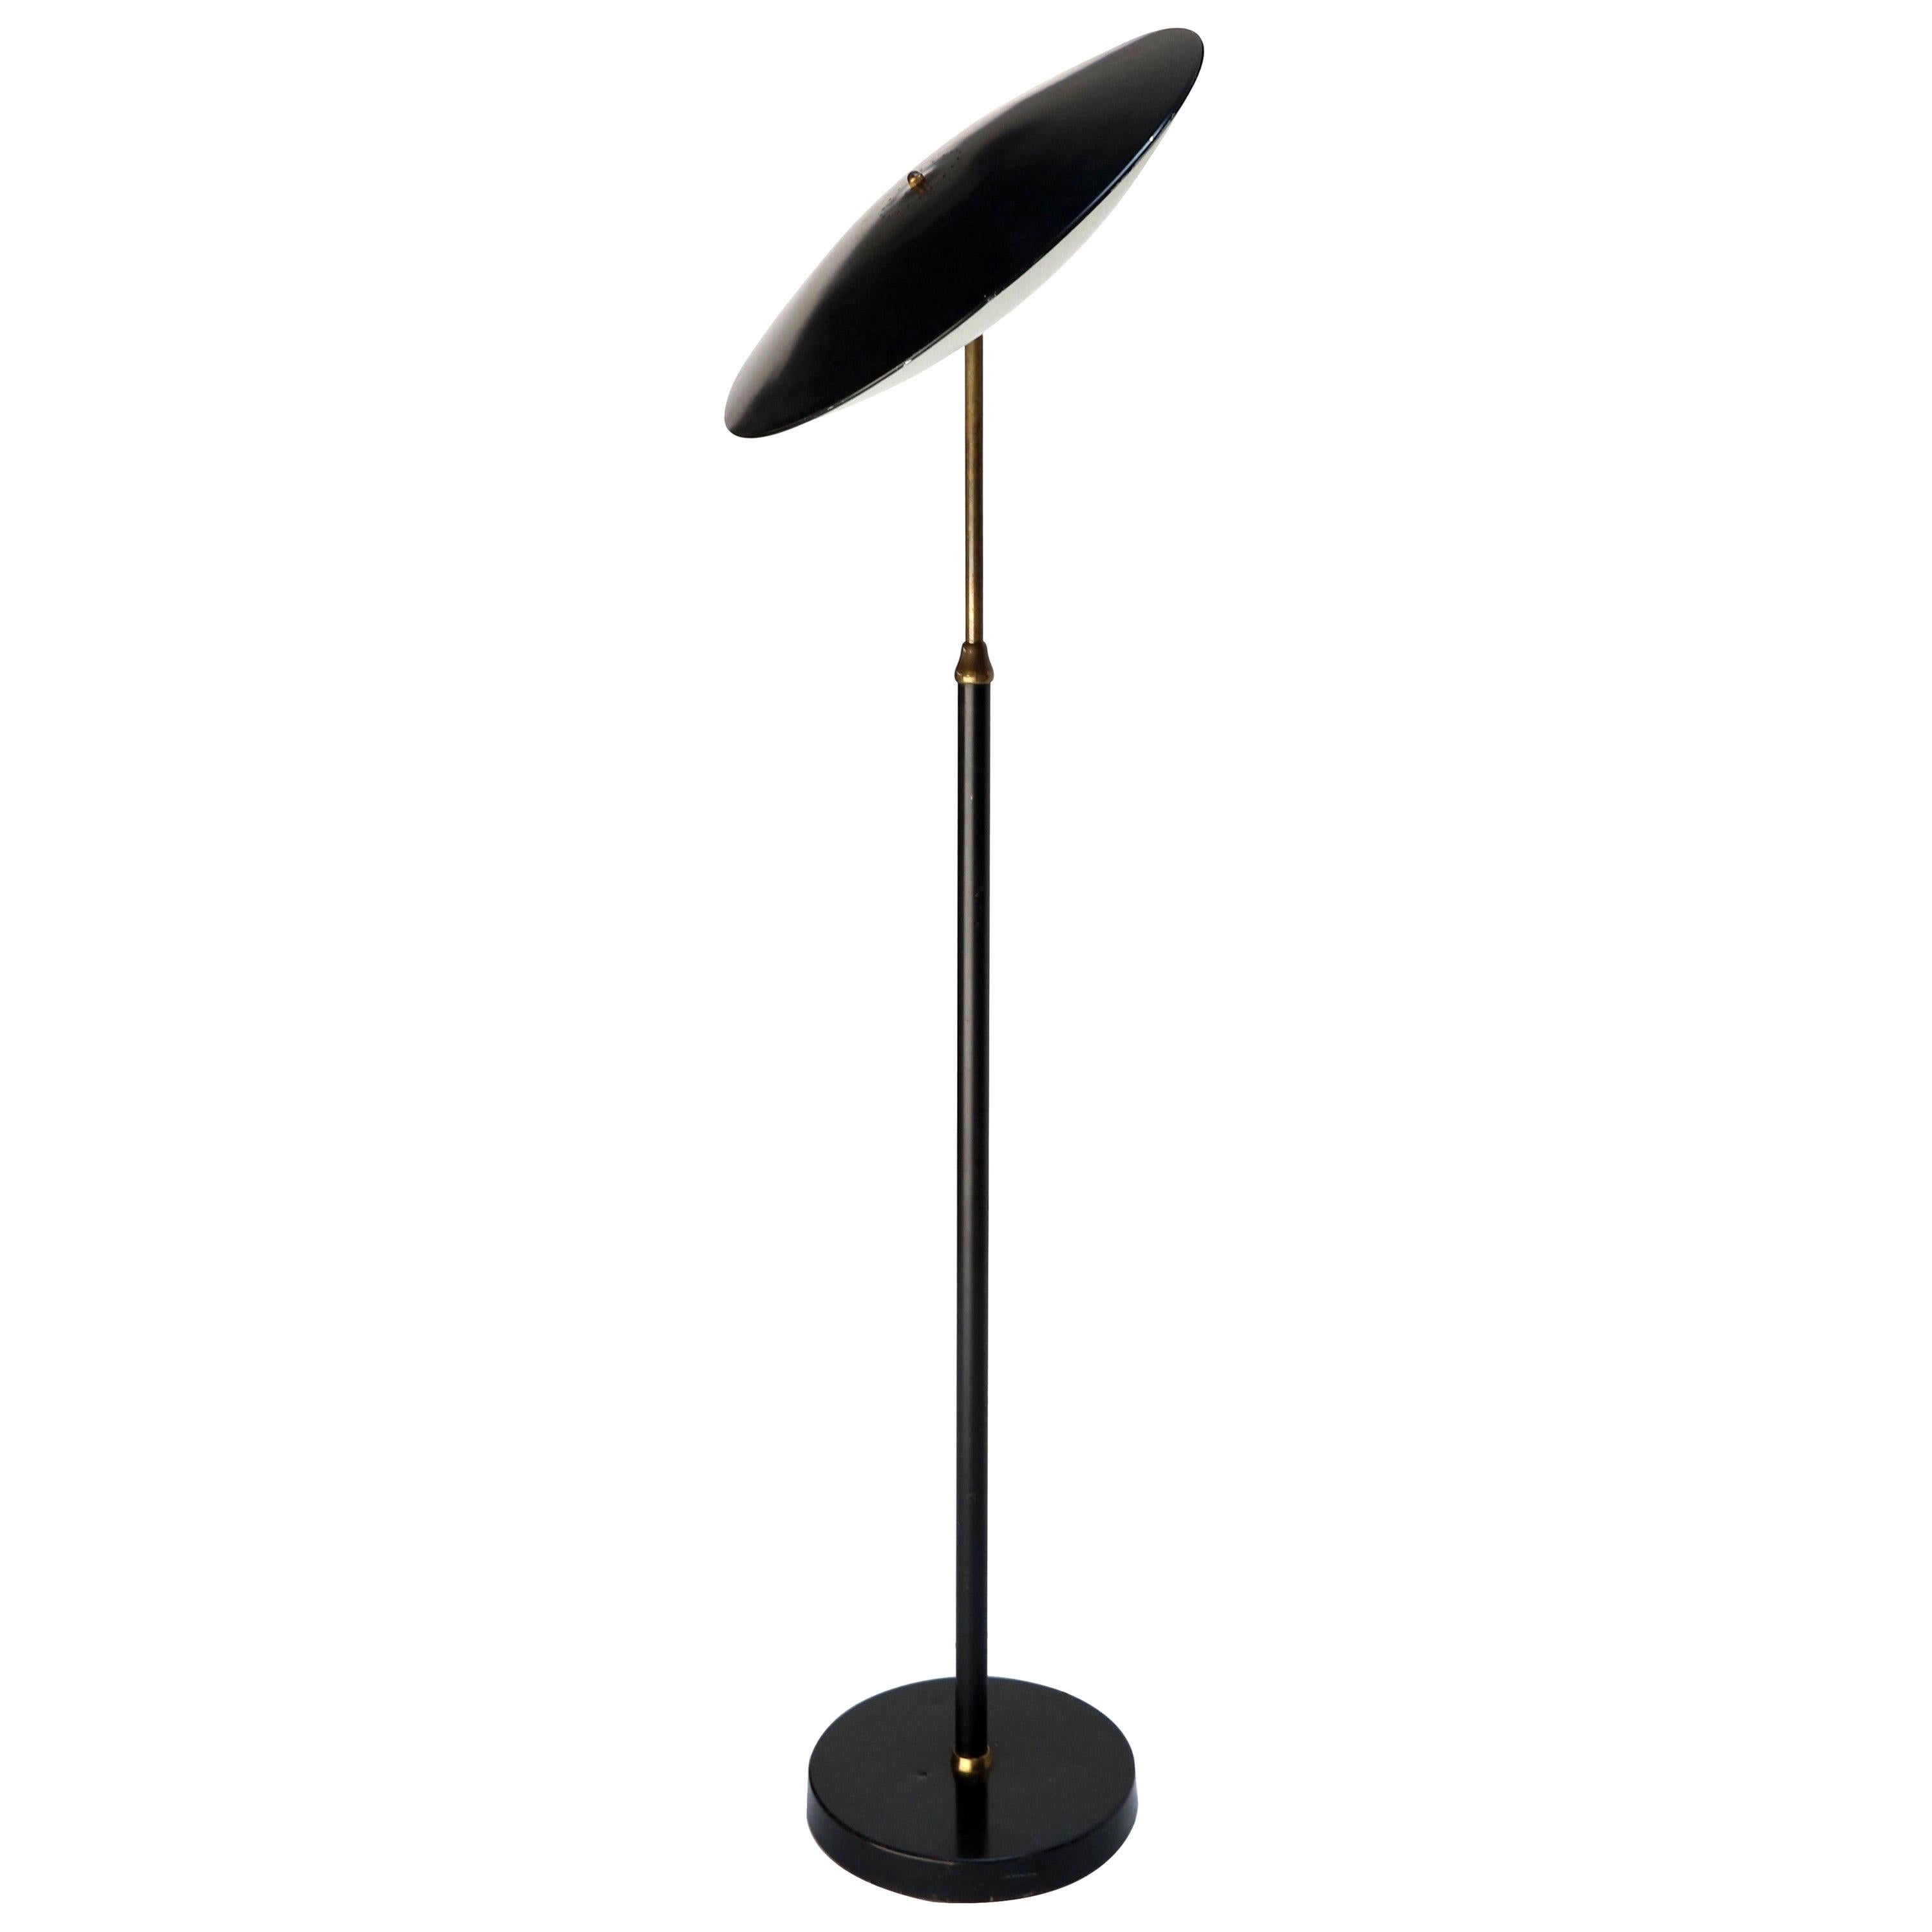 1960s Giuseppe Ostuni Italian black metal floor lamp, with white underside. Head rotates and moves in all directions.